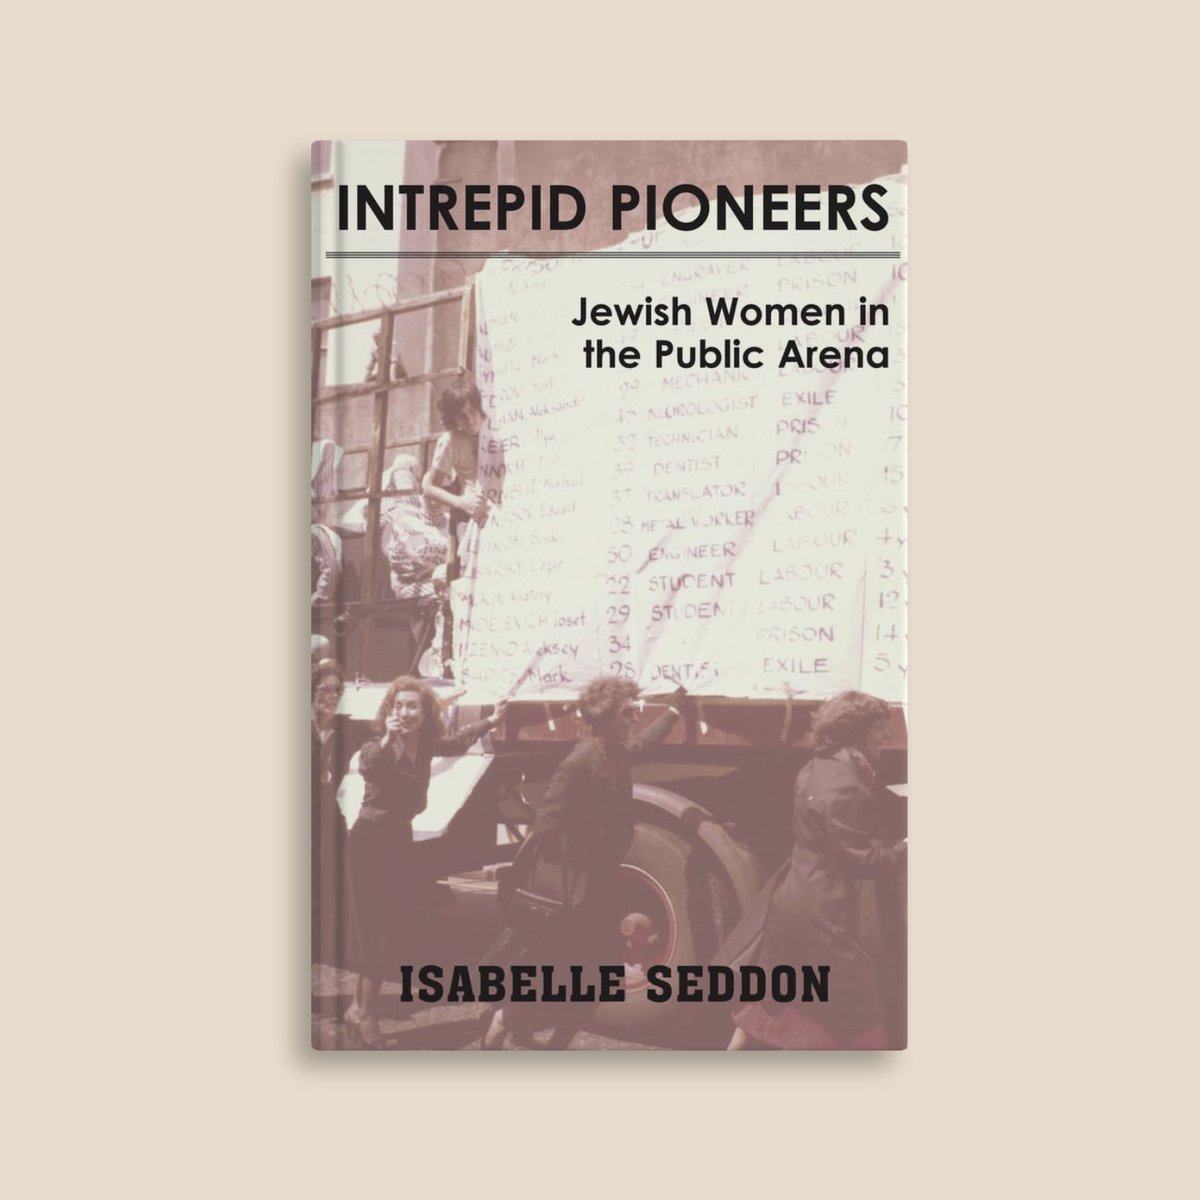 🎊For #IWD24, we're celebrating the writer, drama-therapist and expert on London's East End, Dr Isabelle Seddon. Her latest book, Intrepid Pioneers, looks at Jewish female social justice campaigners during the 1900s. 👀 Discover more about Dr Seddon: sharecirclesquare.com/isabelle-seddon